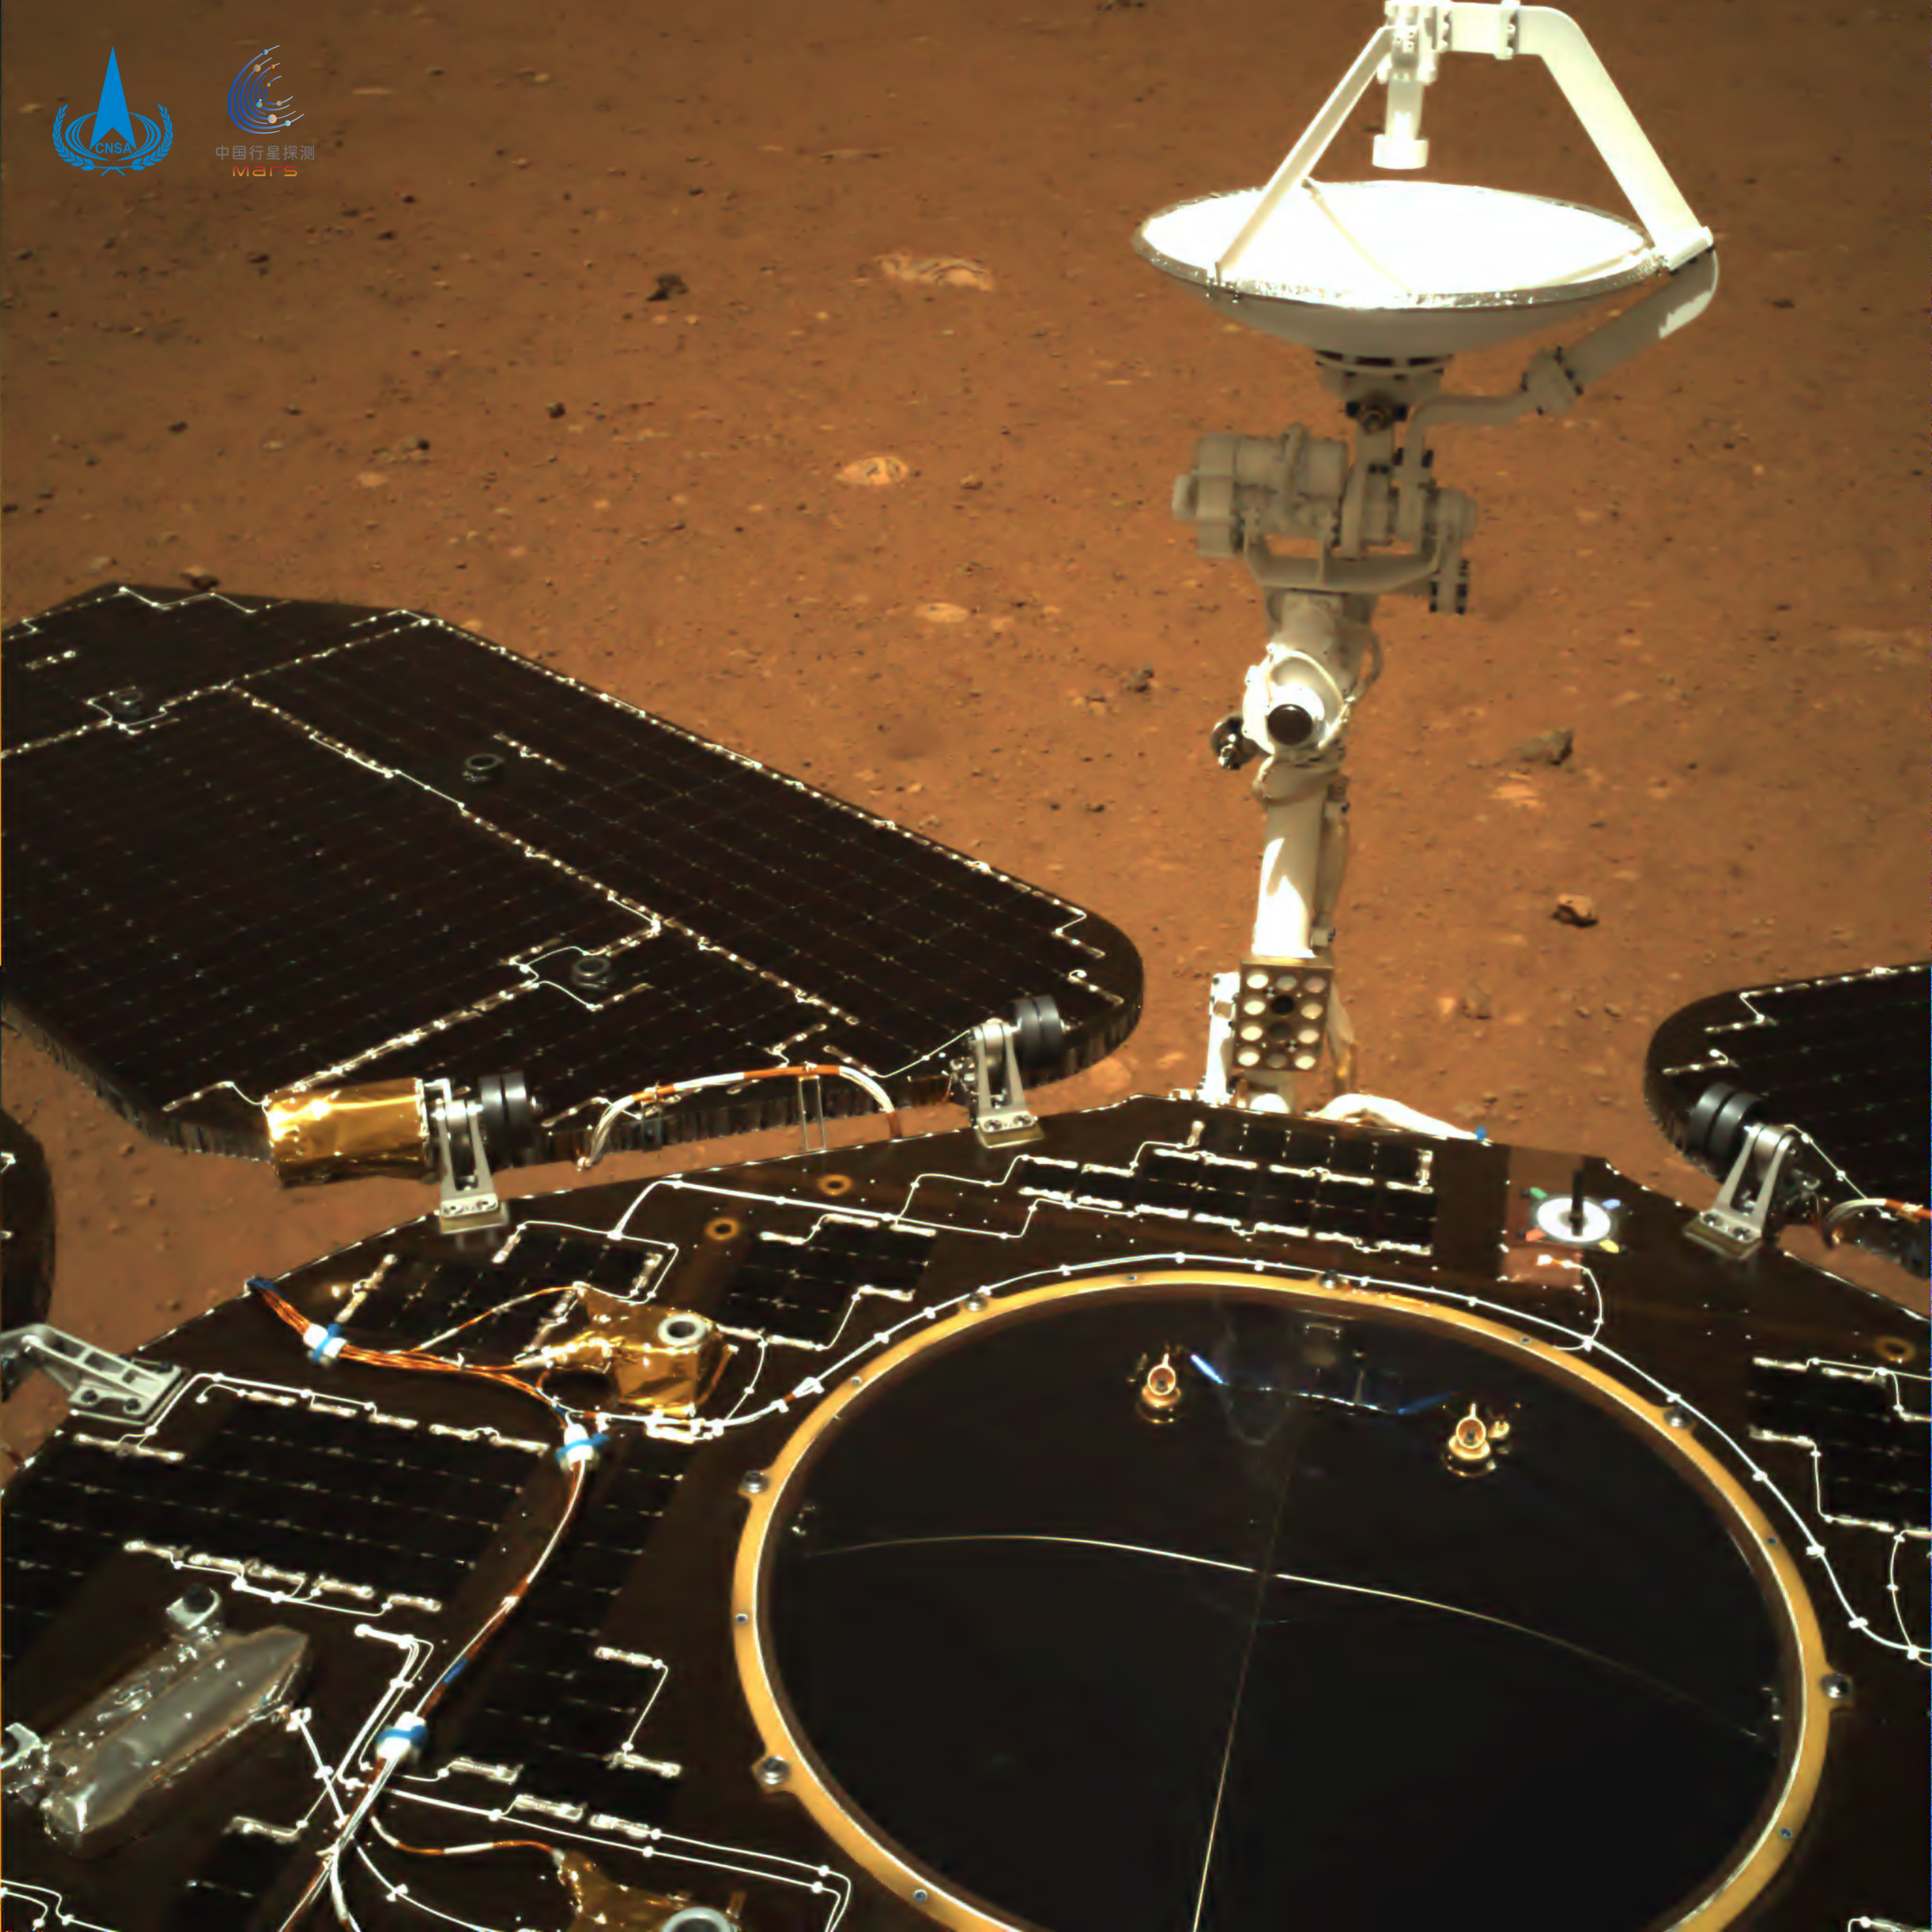 First_image_of_Zhurong_in_color_on_Mars.jpg